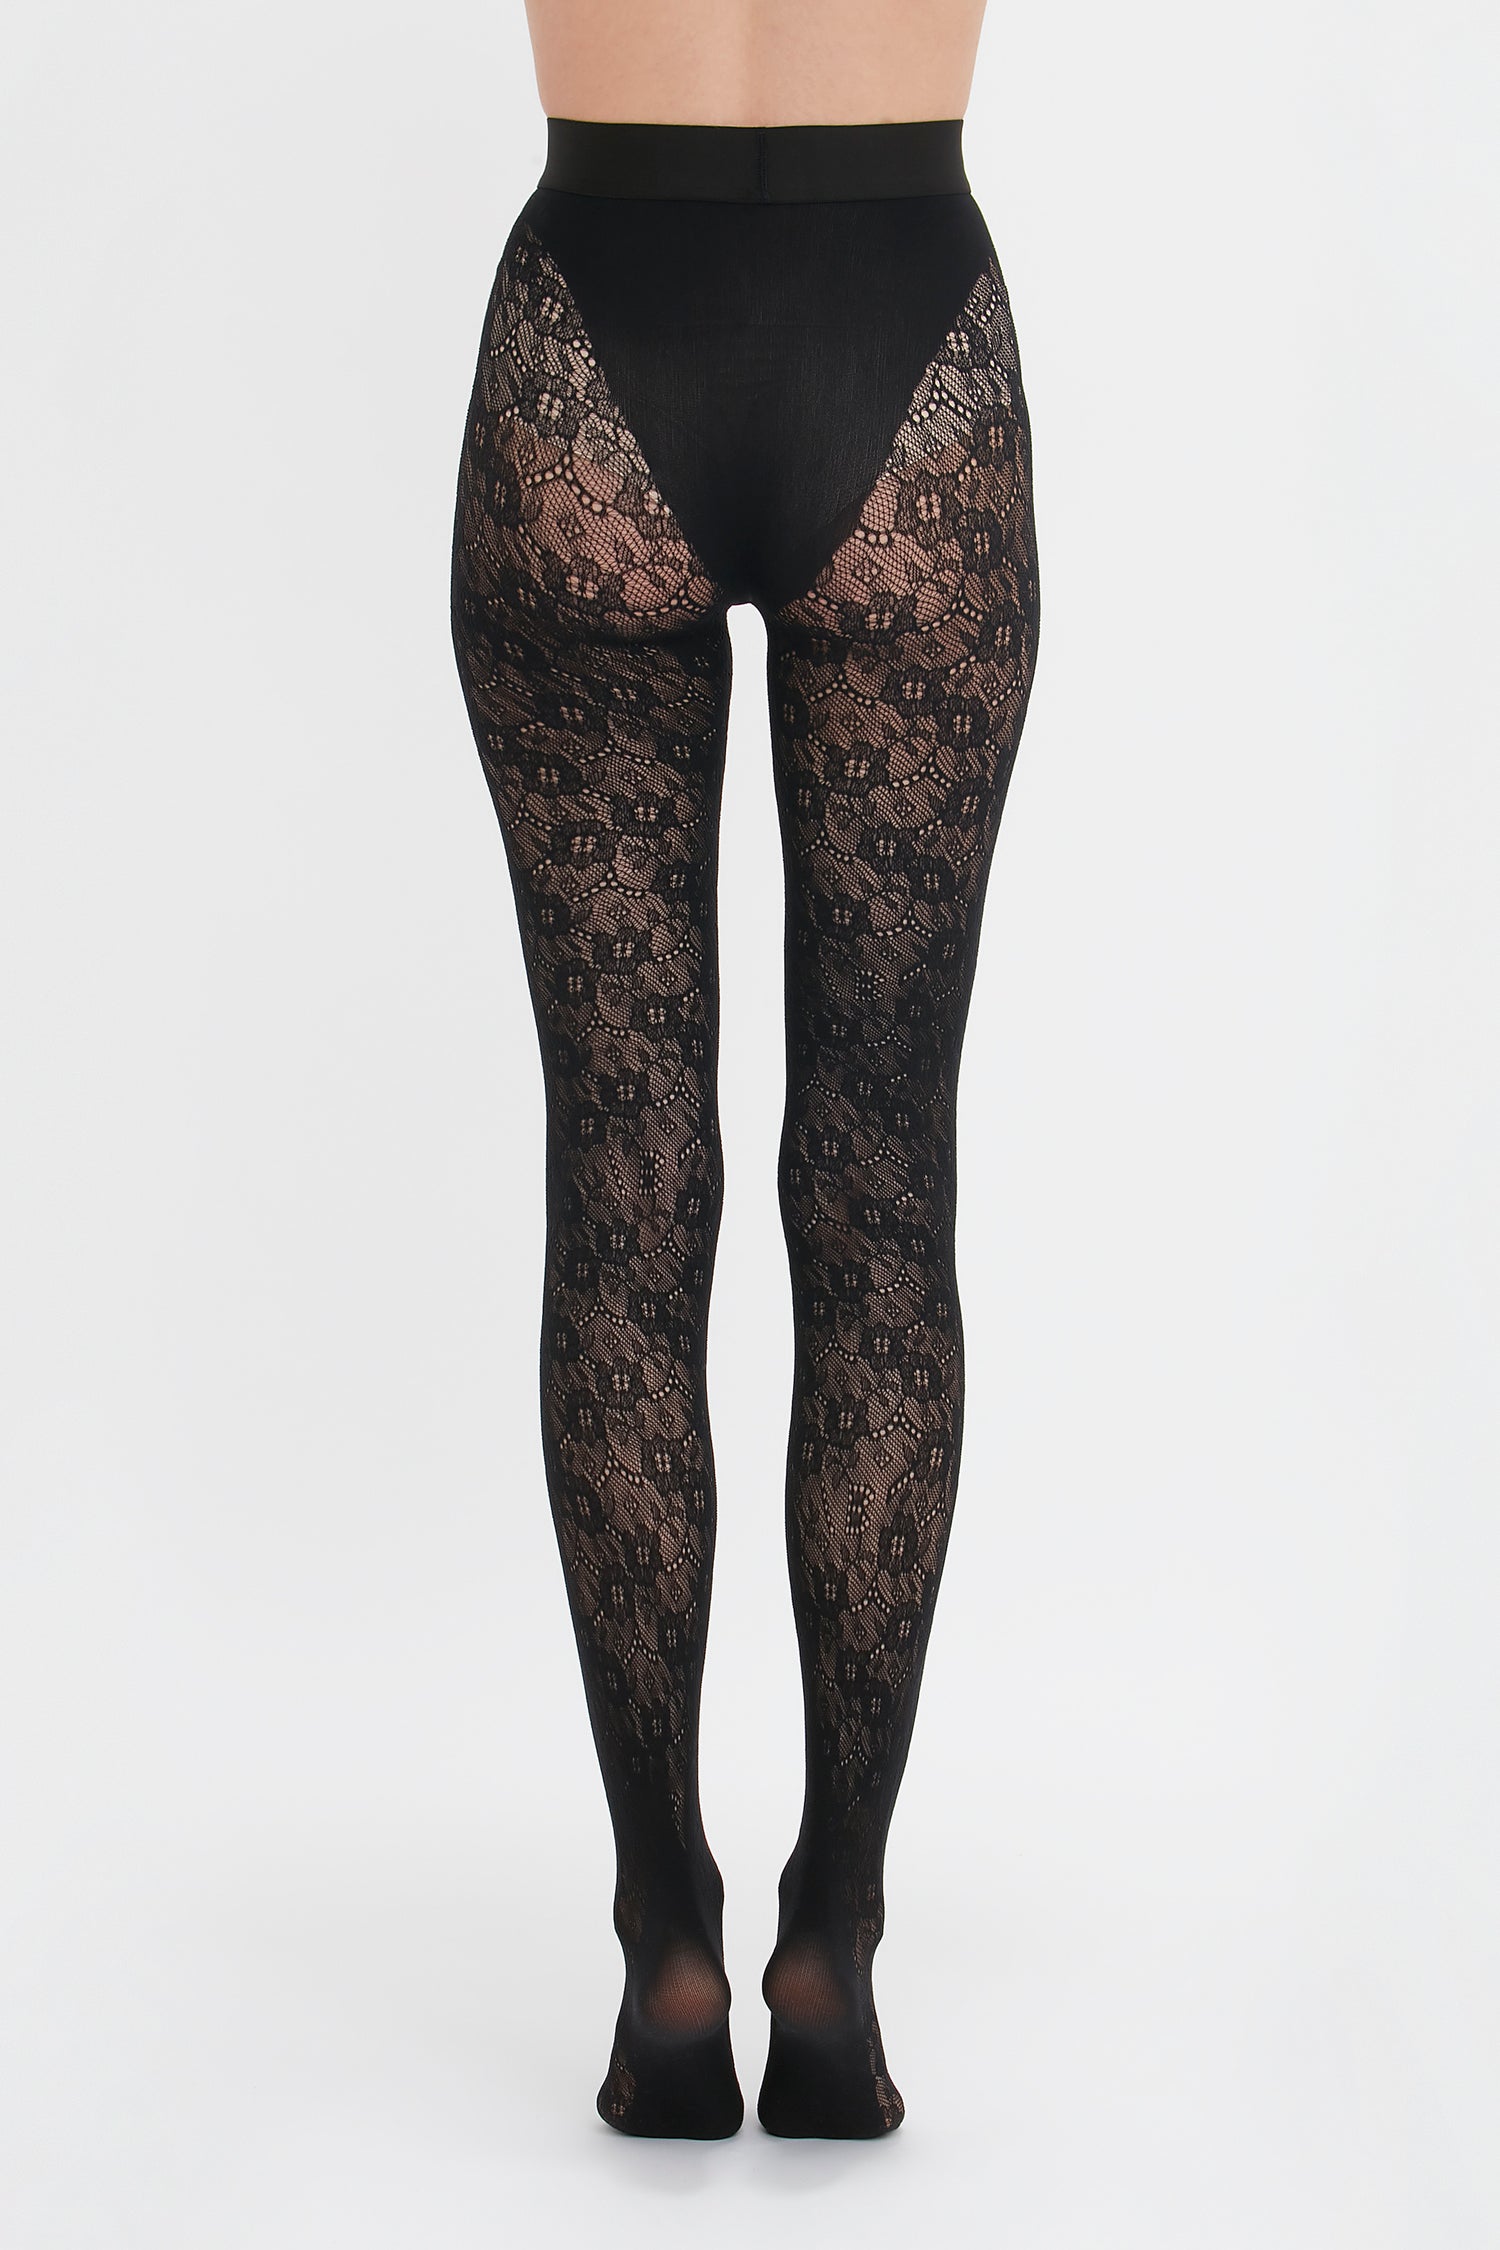 A person stands facing away from the camera, modeling Victoria Beckham's Exclusive VB Monogram Lace Tights In Black with seamless and sag-free construction against a white background.